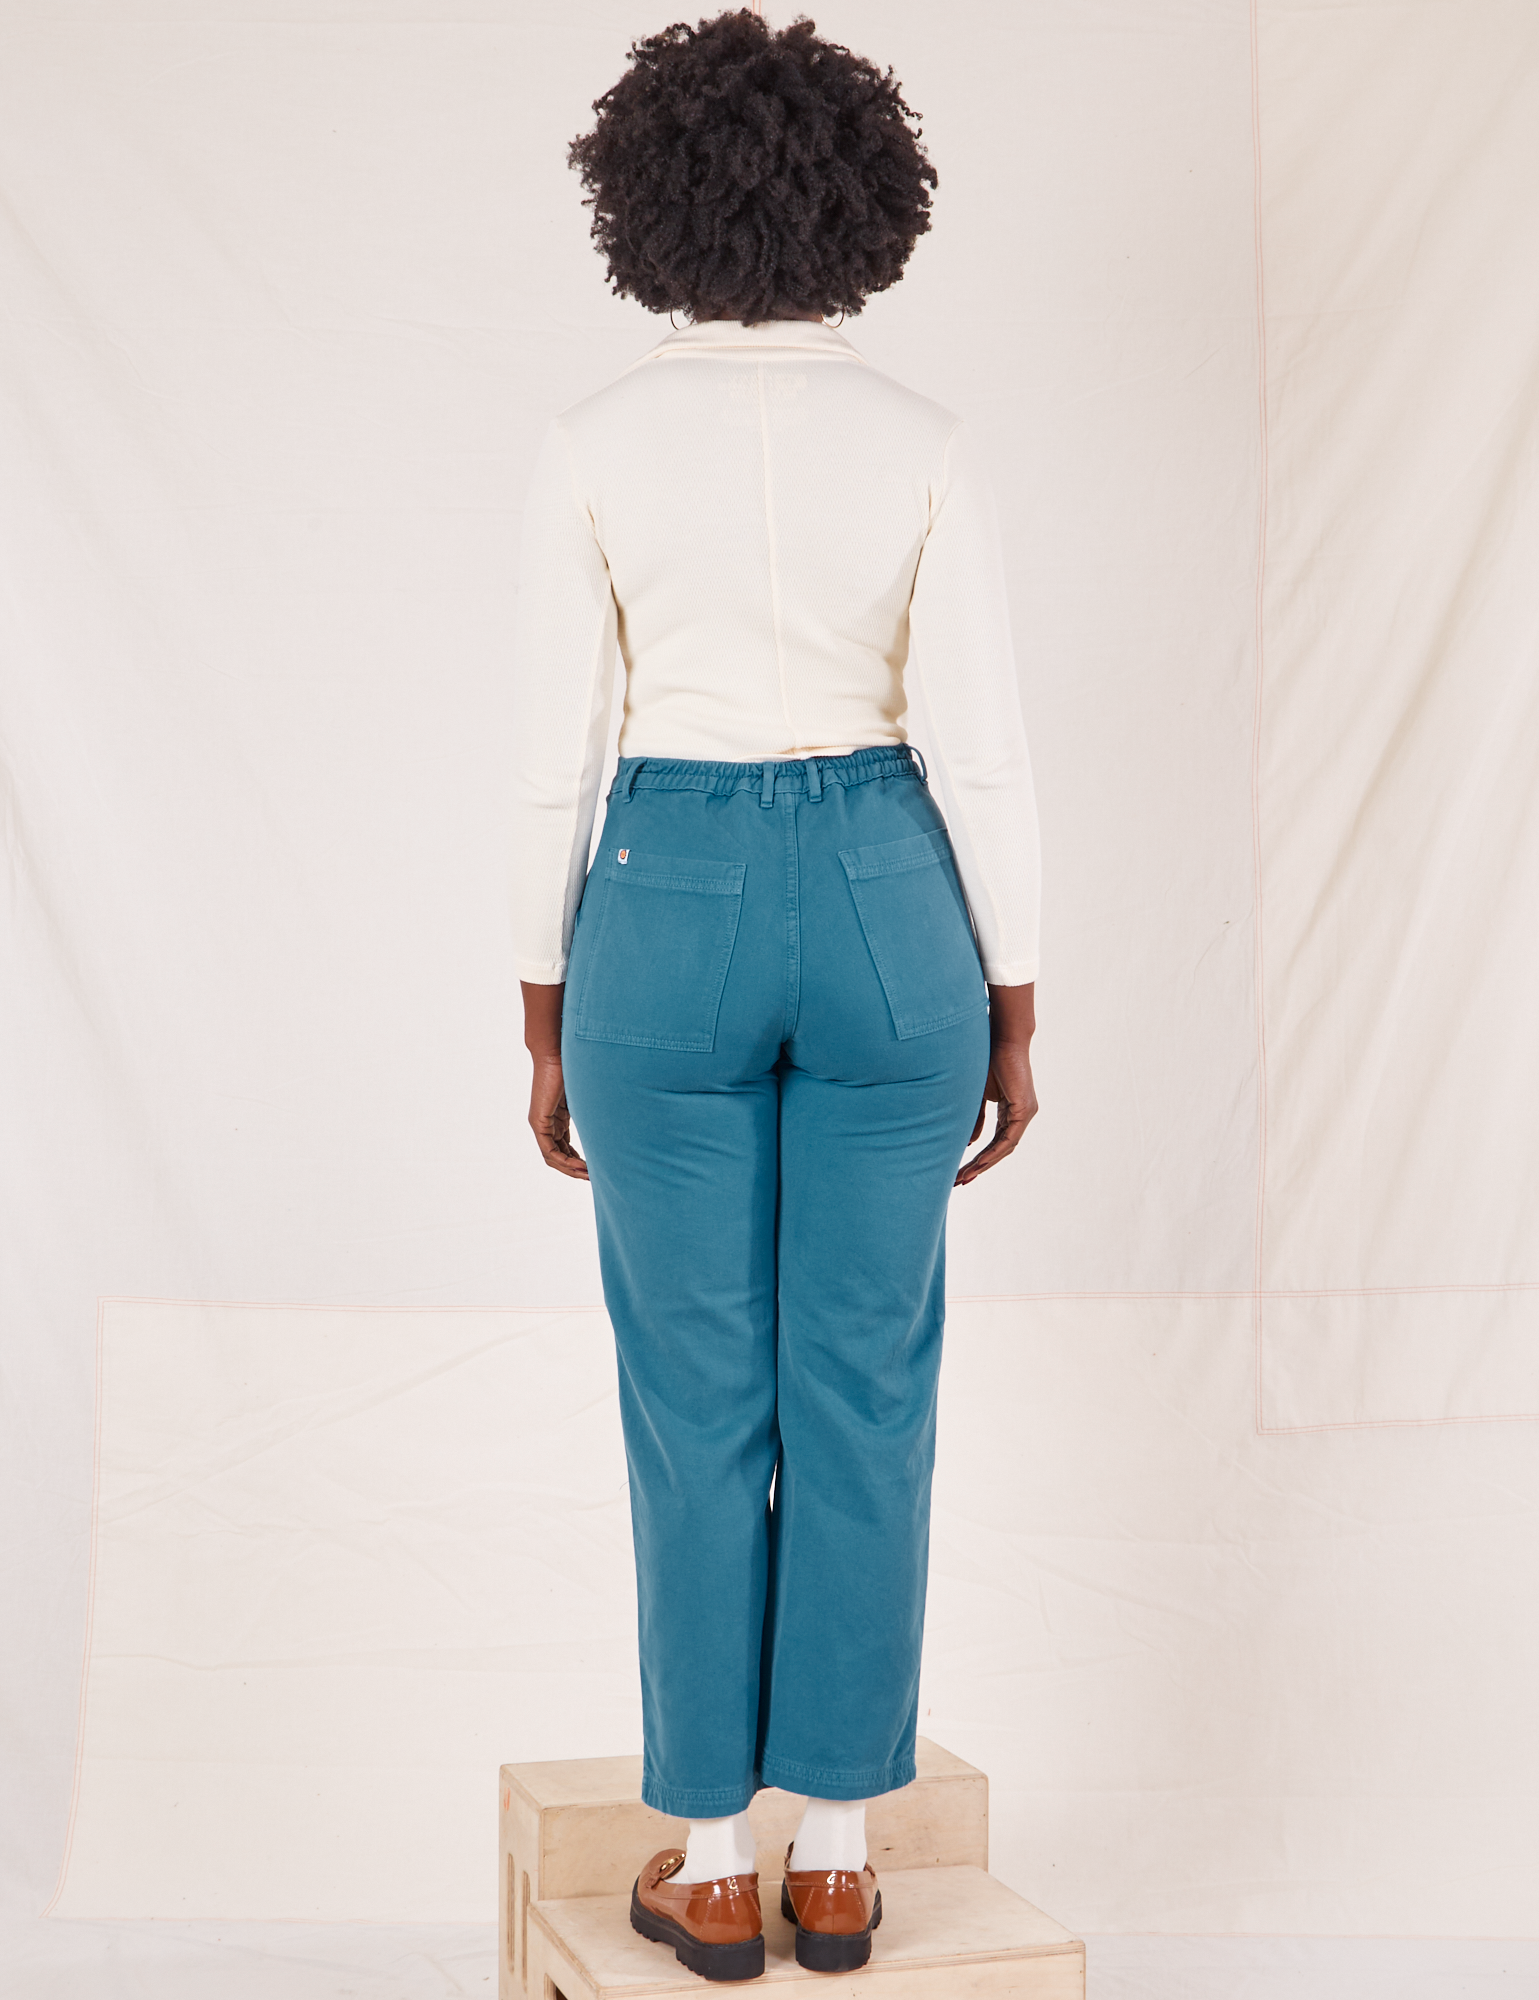 Back view of Organic Work Pants in Marine Blue worn by Reece